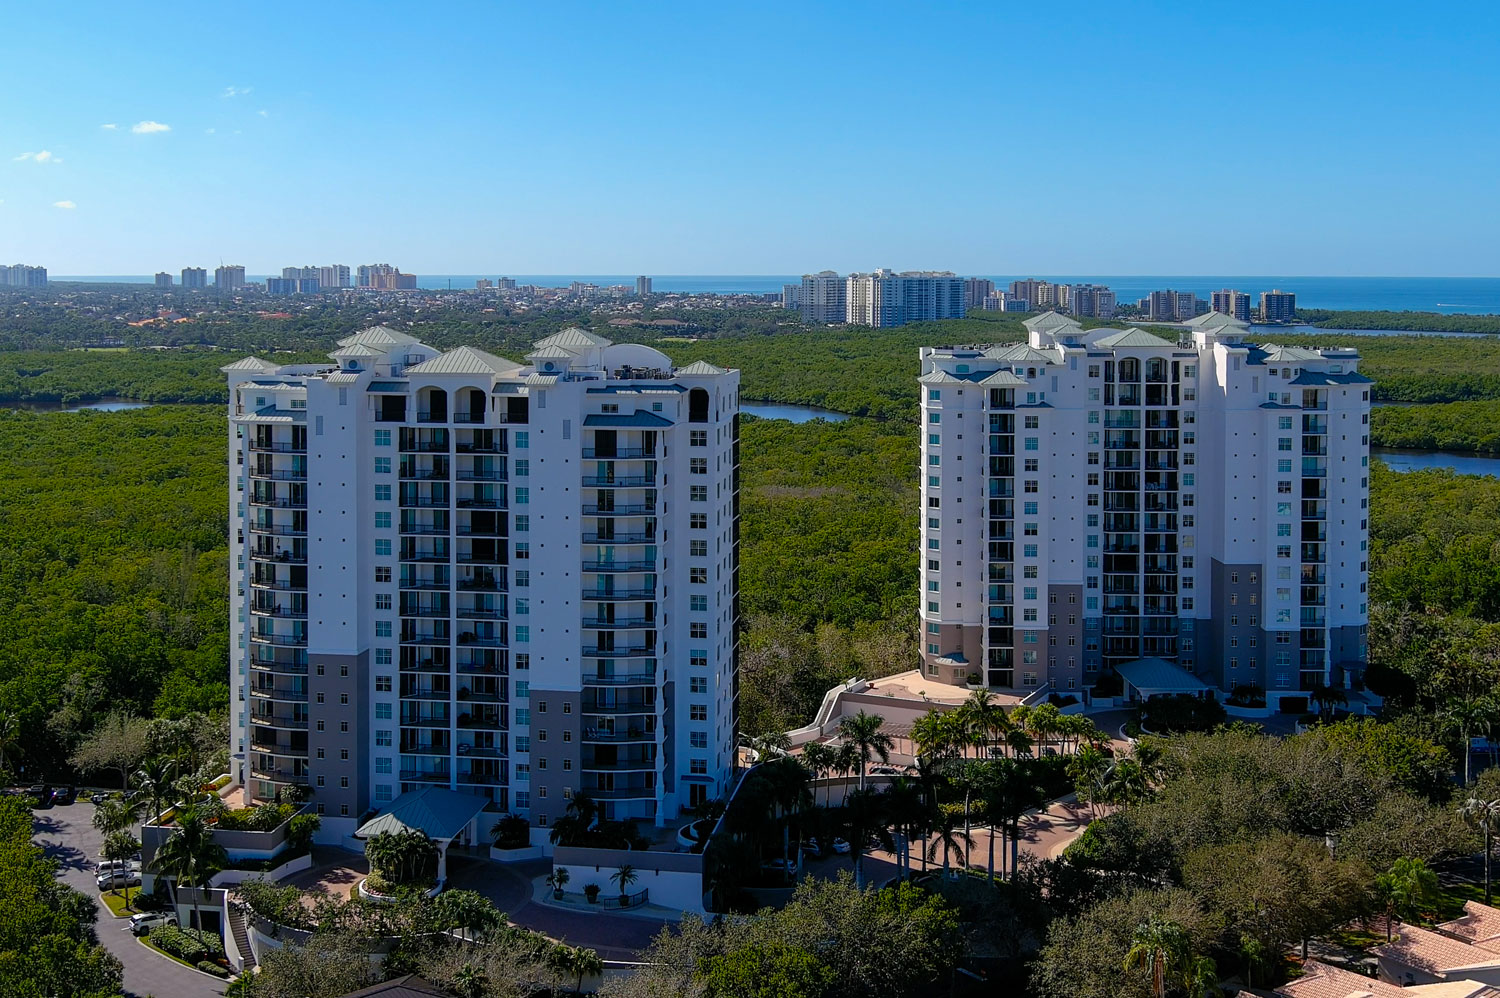 Cove Towers Preserve